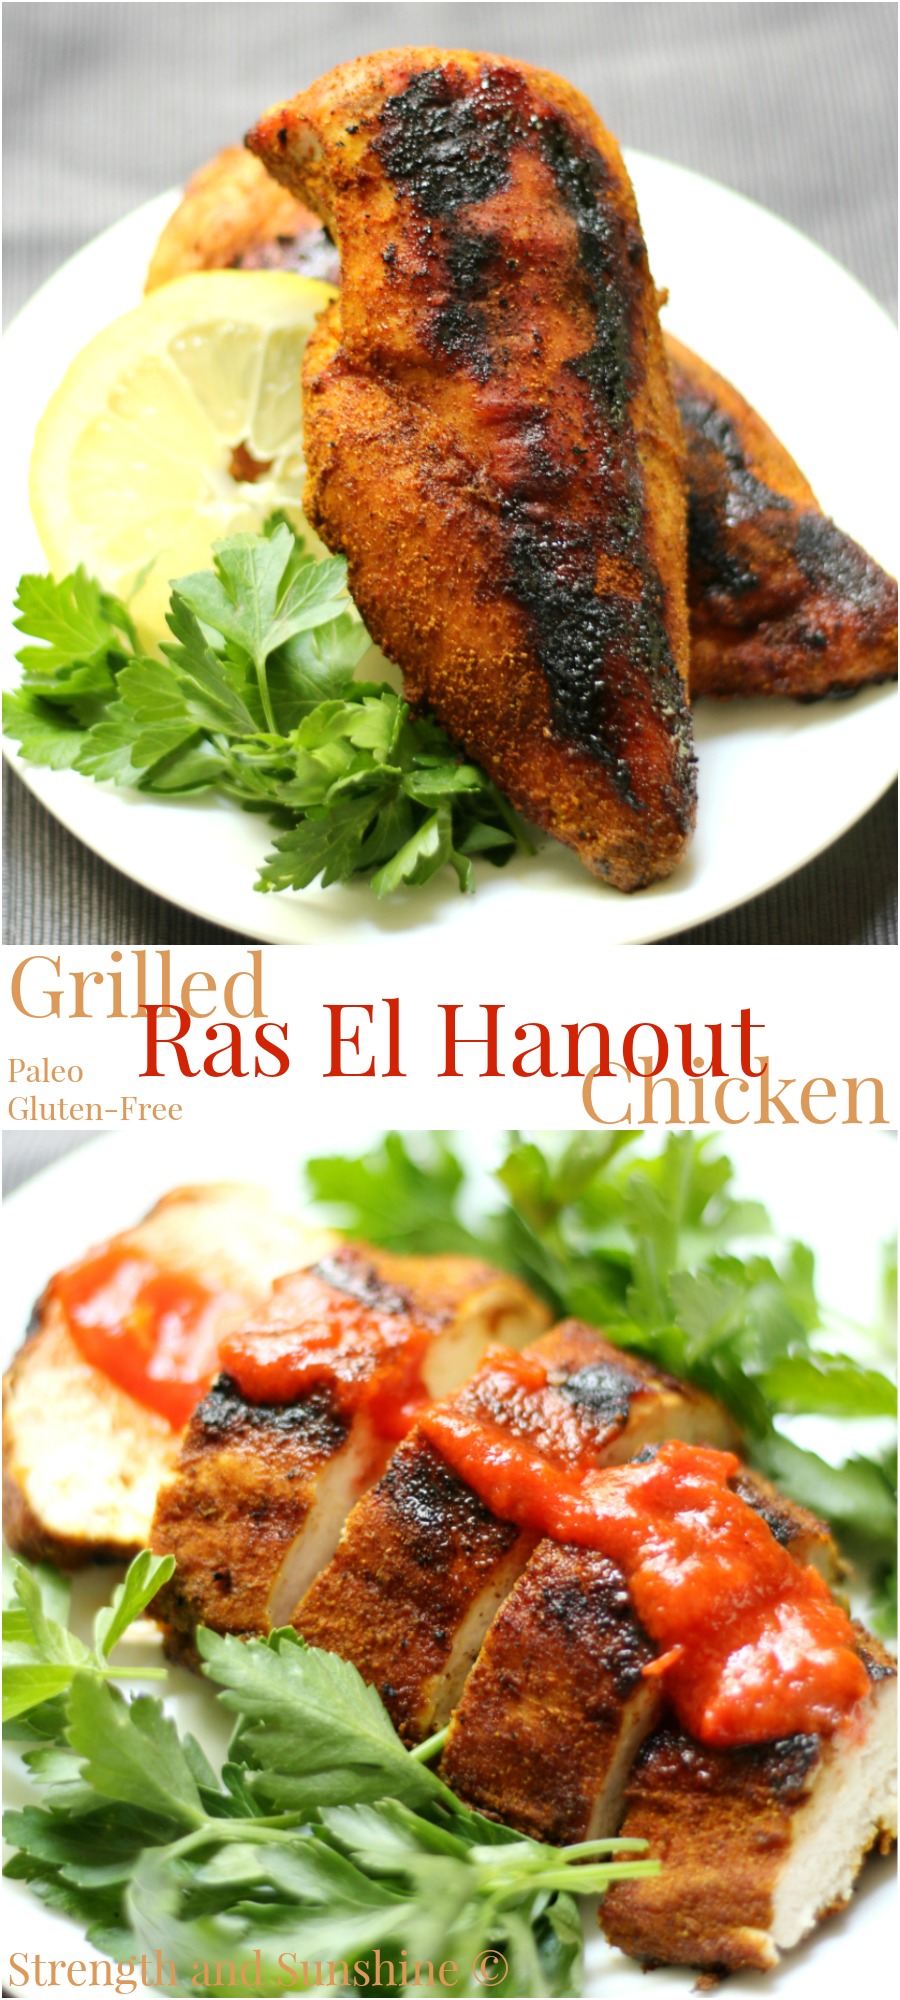 Grilled Ras El Hanout Chicken | Strength and Sunshine @RebeccaGF666 With an essential Moroccan spice blend, Grilled Ras El Hanout Chicken will become a new favorite healthy dinner recipe to throw on the grill. Gluten-free, paleo, and Whole 30 approved, entice the senses of smell and taste with this exotic dish.